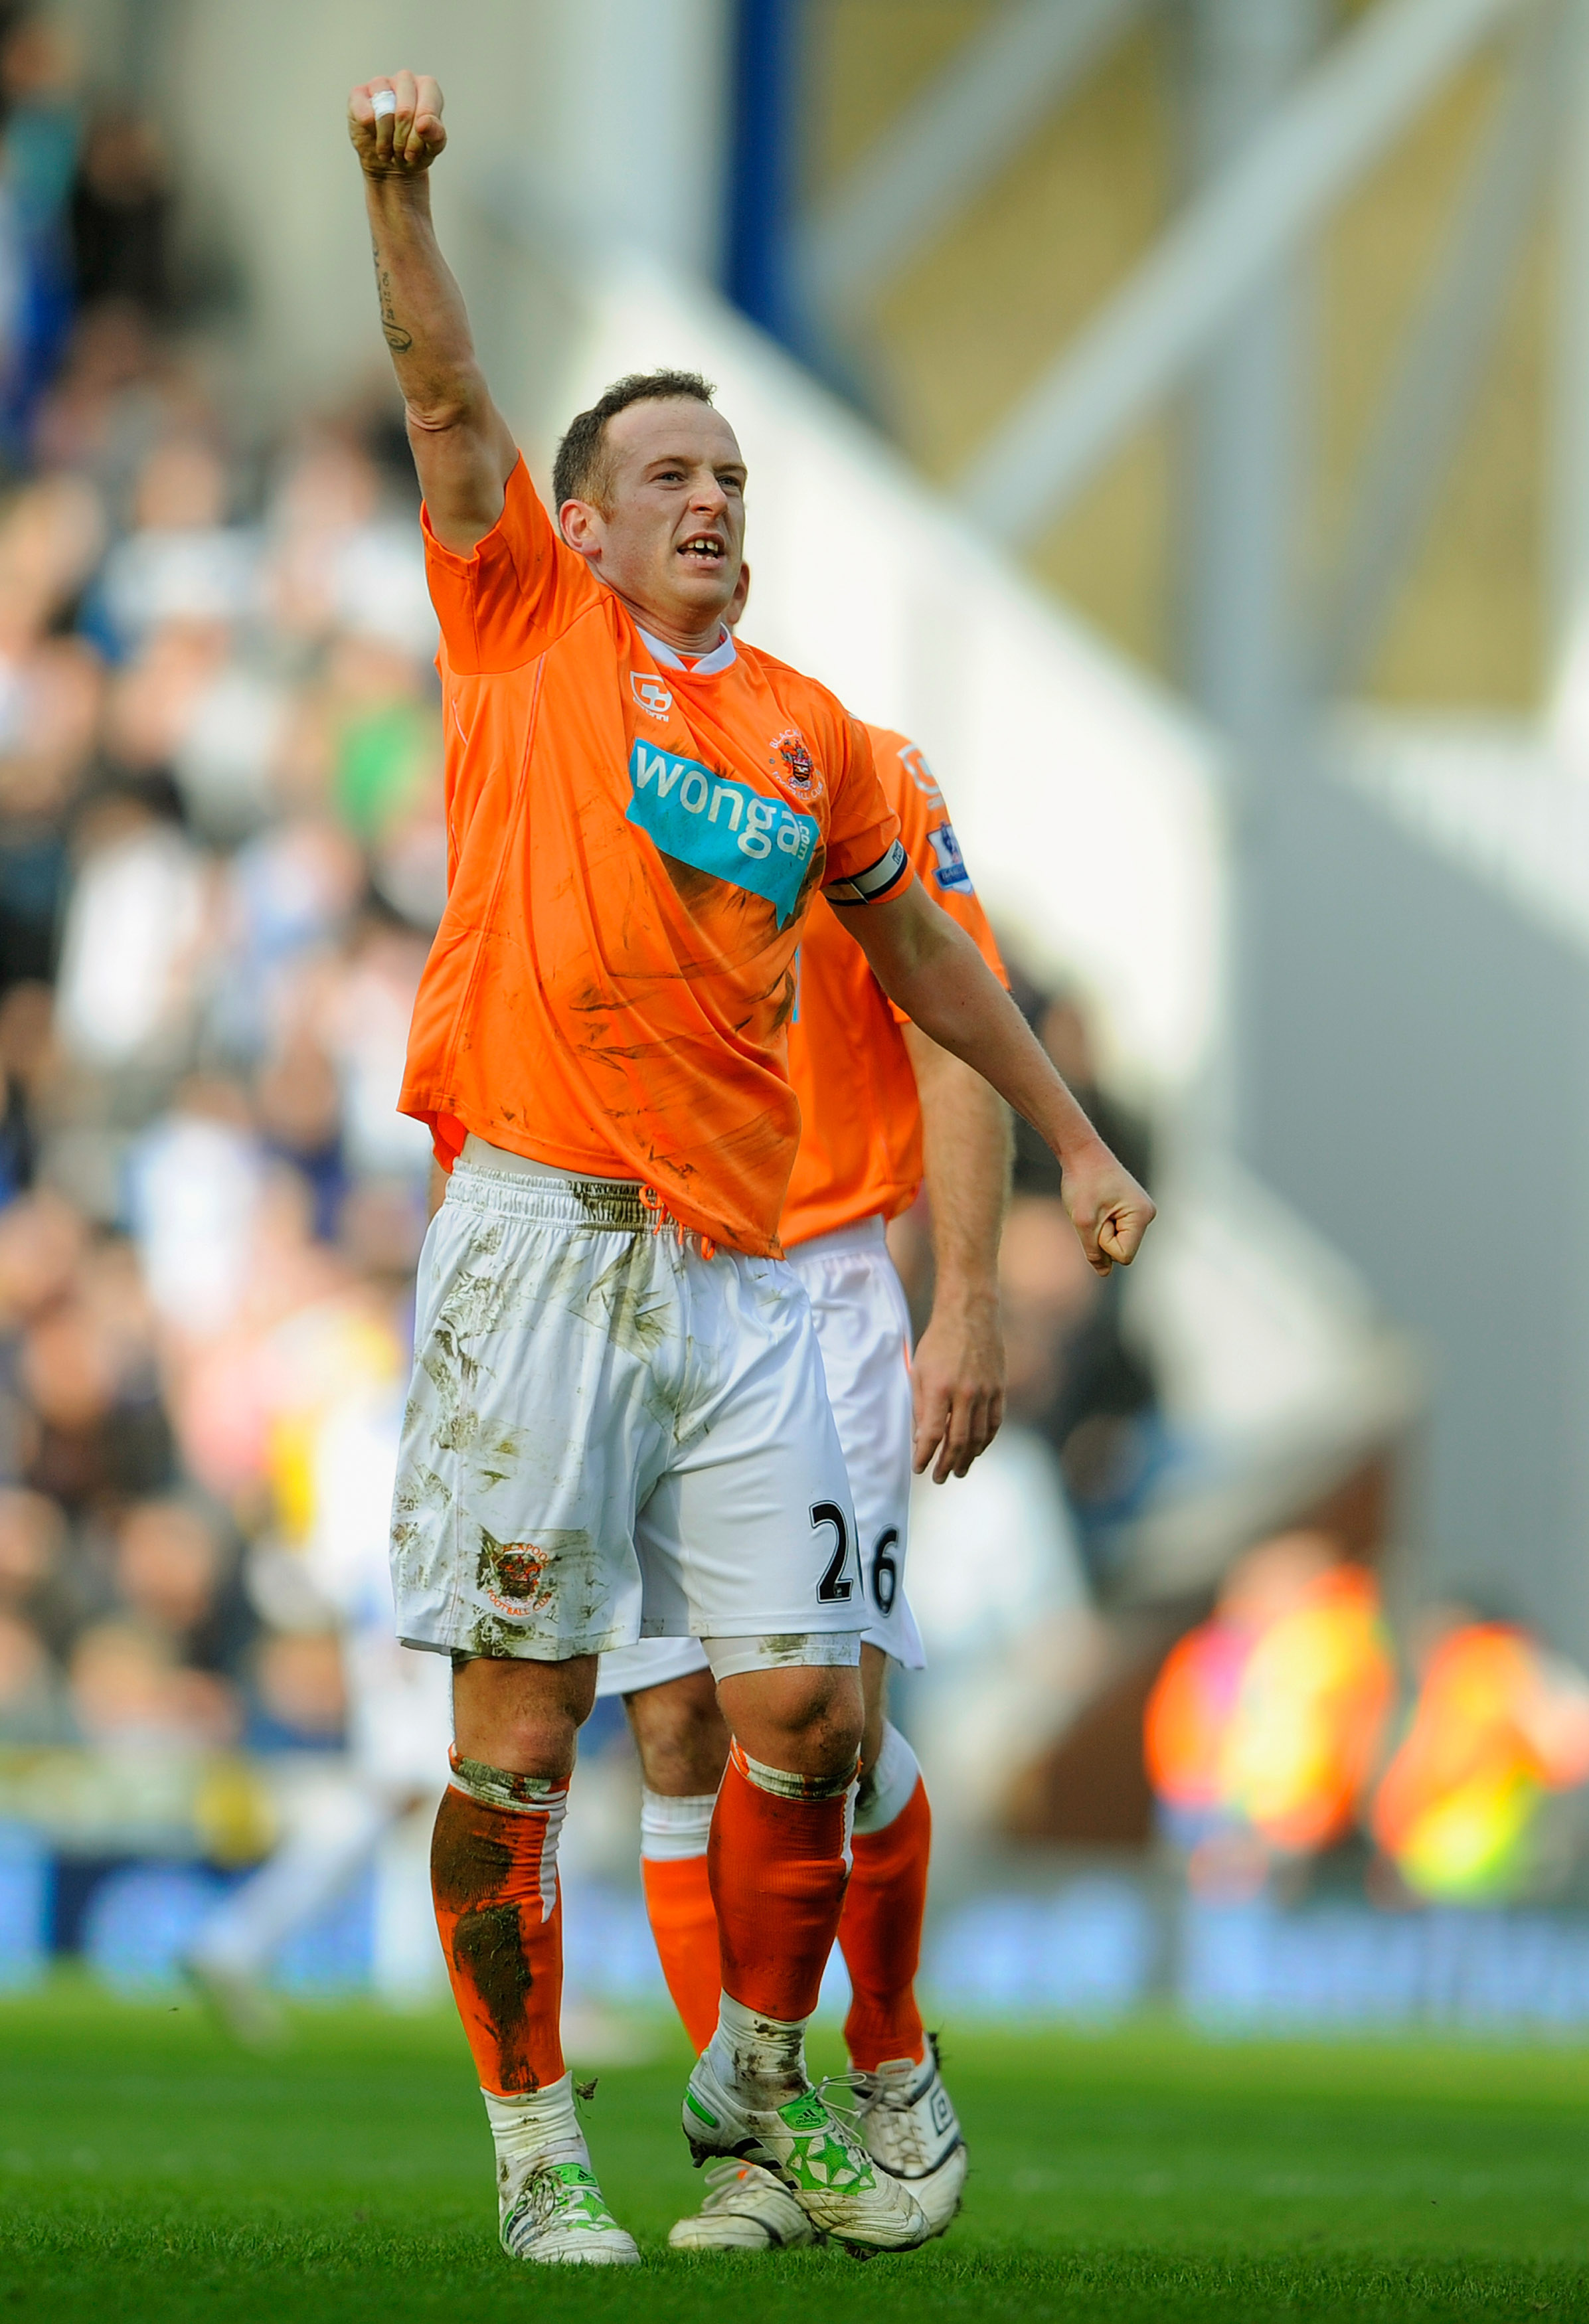 BLACKBURN, ENGLAND - MARCH 19:  Charlie Adam of Blackpool celebrates scoring to make it 1-0 during the Barclays Premier League match between Blackburn Rovers and Blackpool at Ewood Park on March 19, 2011 in Blackburn, England.  (Photo by Michael Regan/Get